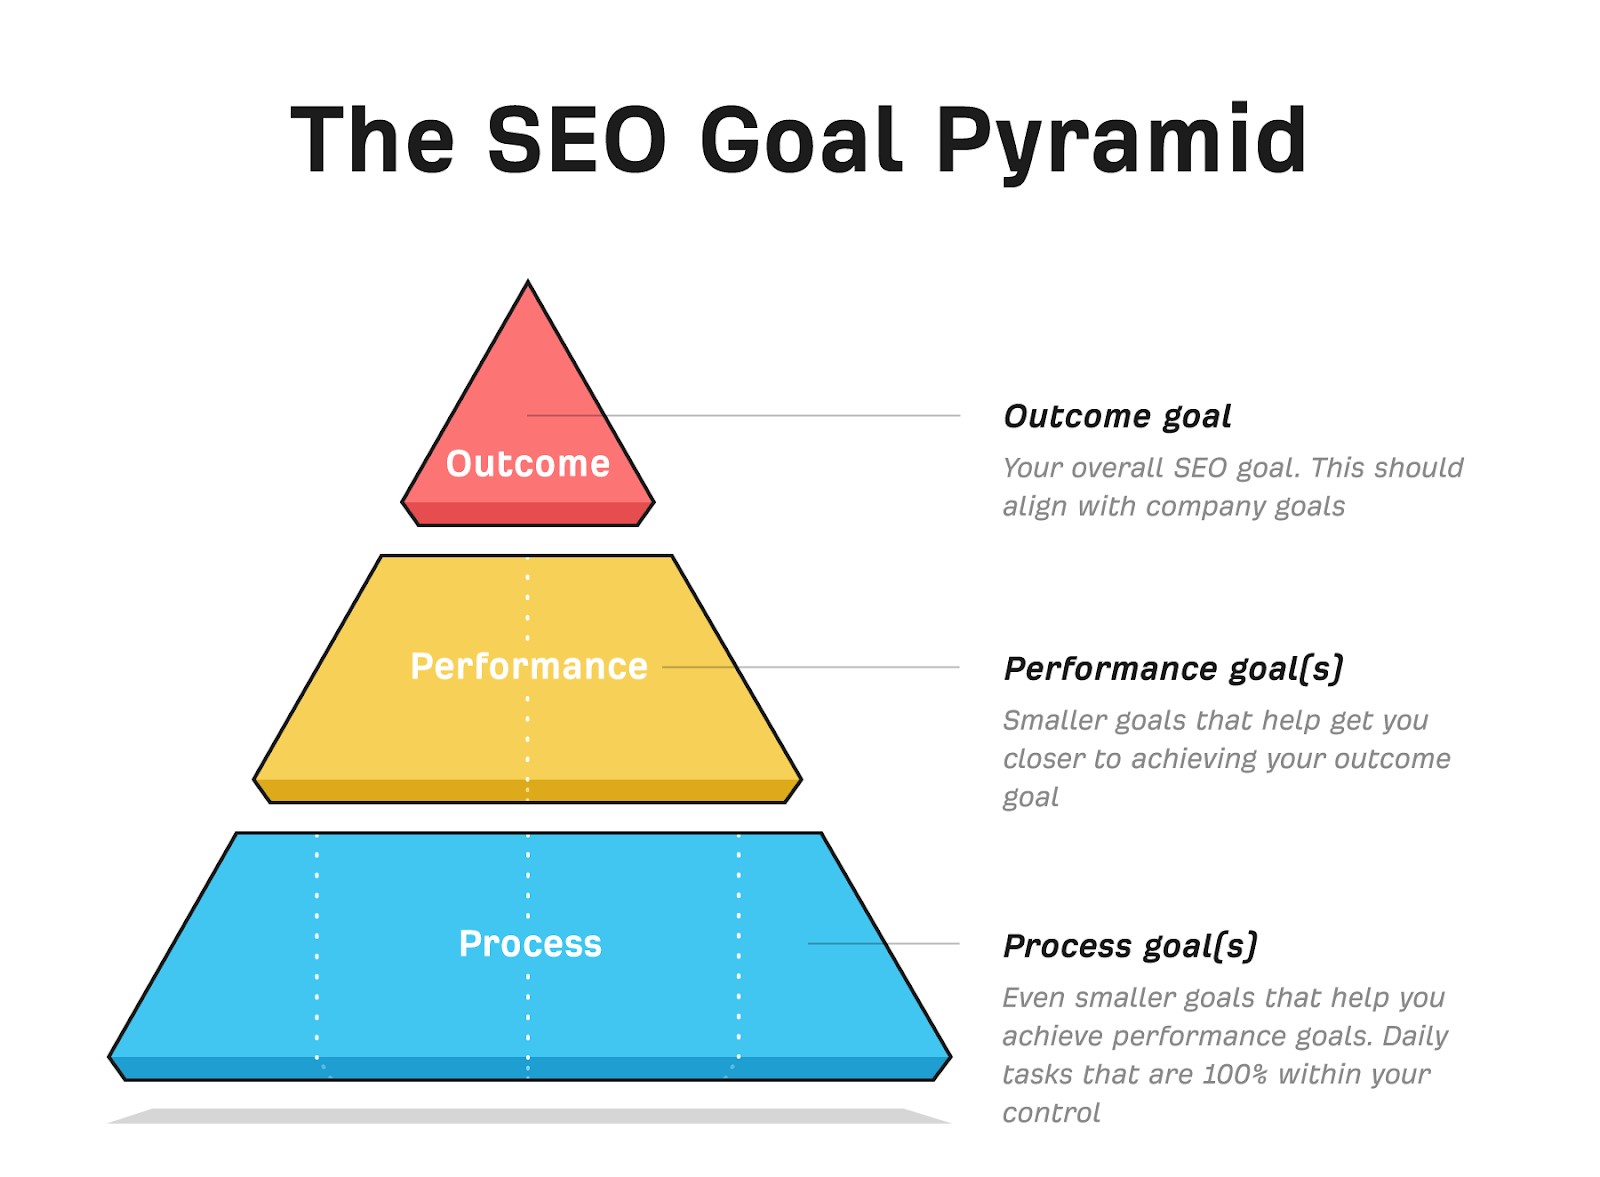 Seo goals pyramid showing 3 different goals in different colors